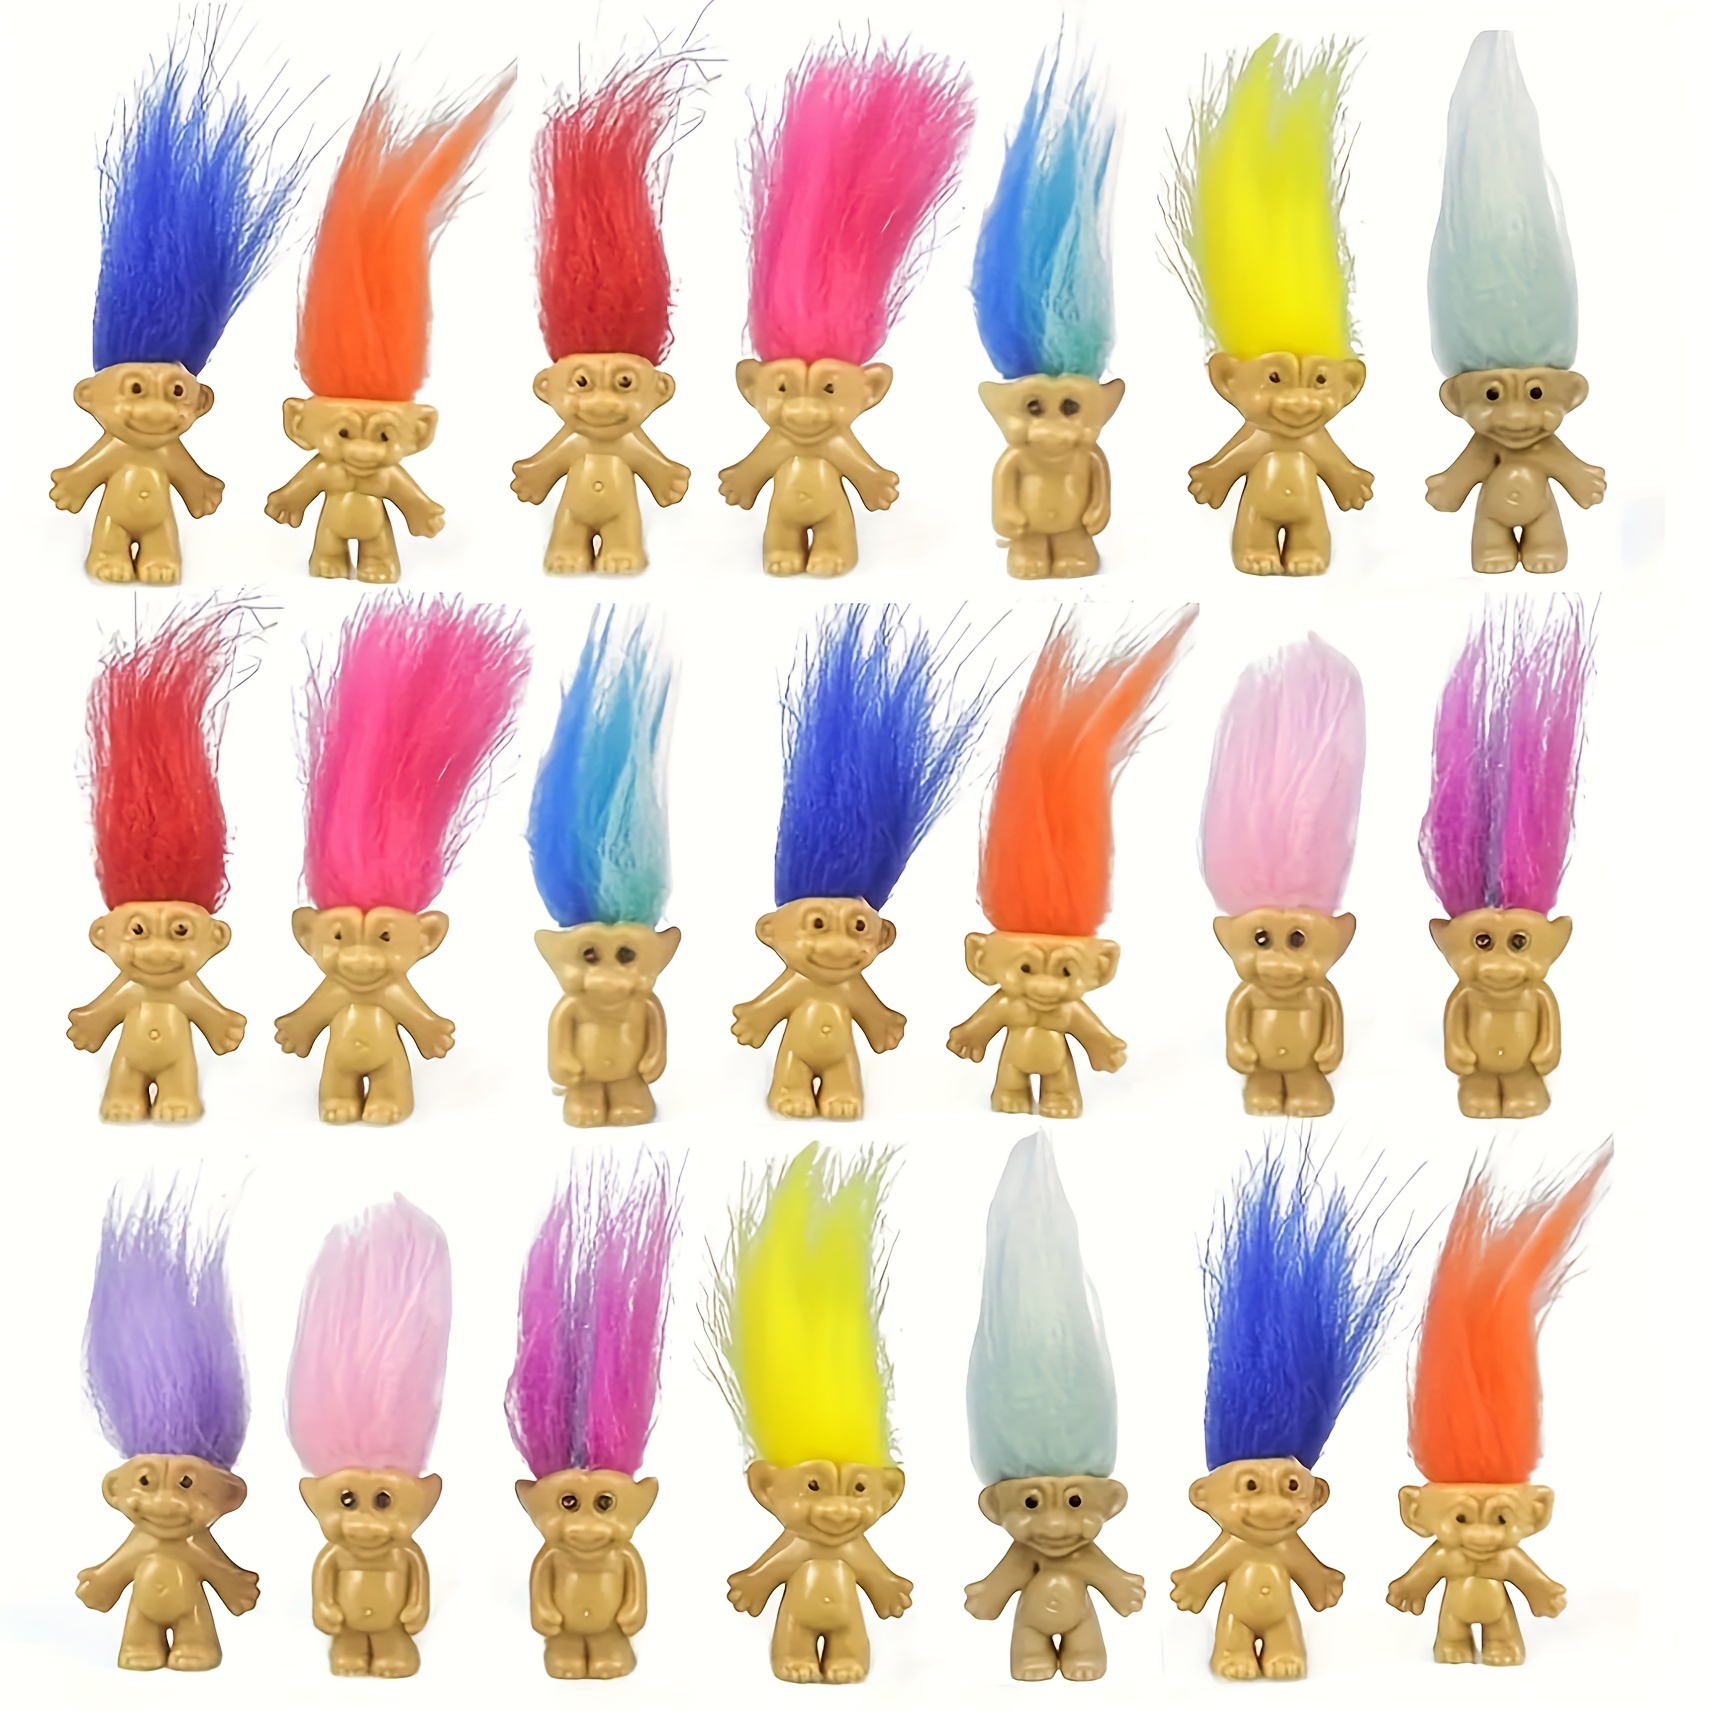 

Adorable Mini Troll Dolls Set (10/20/30 Pcs) - Vintage Pvc Lucky Charms, Colorful Miniature Action Figures & Cake Toppers, Perfect For Arts, Crafts, School Projects & Party Favors - Assorted Styles